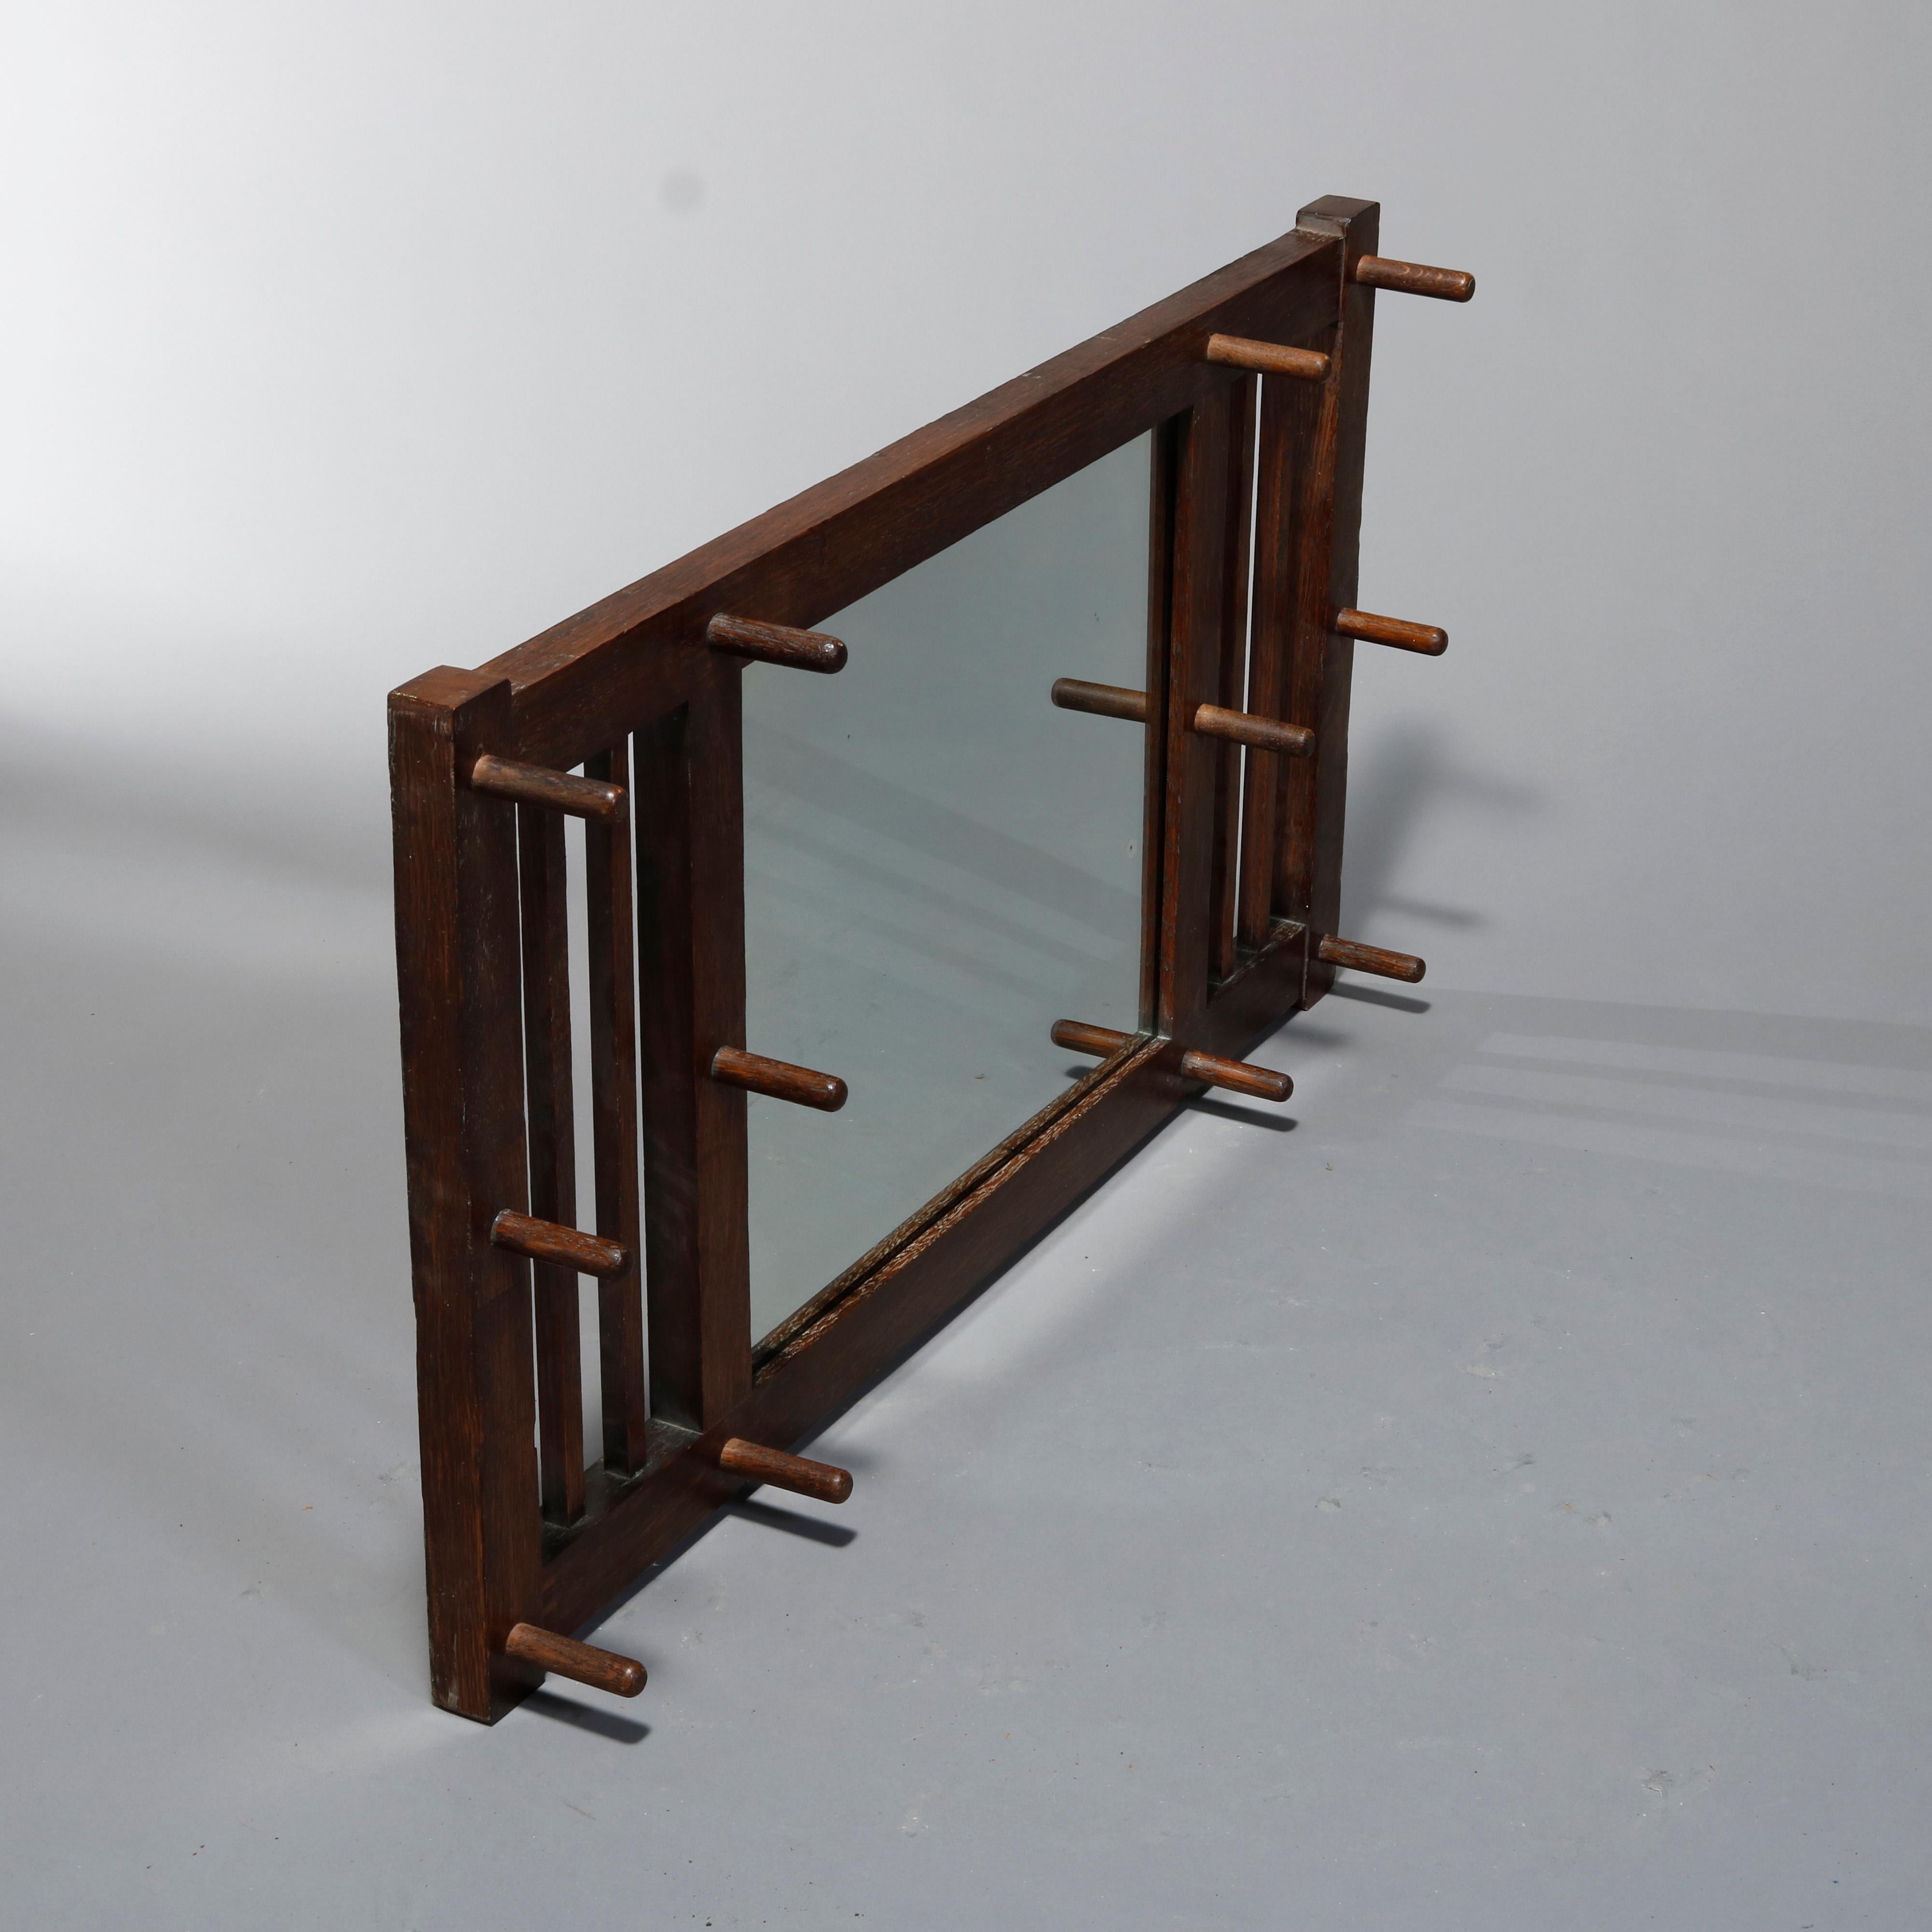 An antique Arts & Crafts Mission hat rack wall mirror by Stickley Bros. offers quarter sawn oak construction with central mirror having flaking slat sides with hat hangers, en verso stenciled 513, c1910

Measures: 24.75